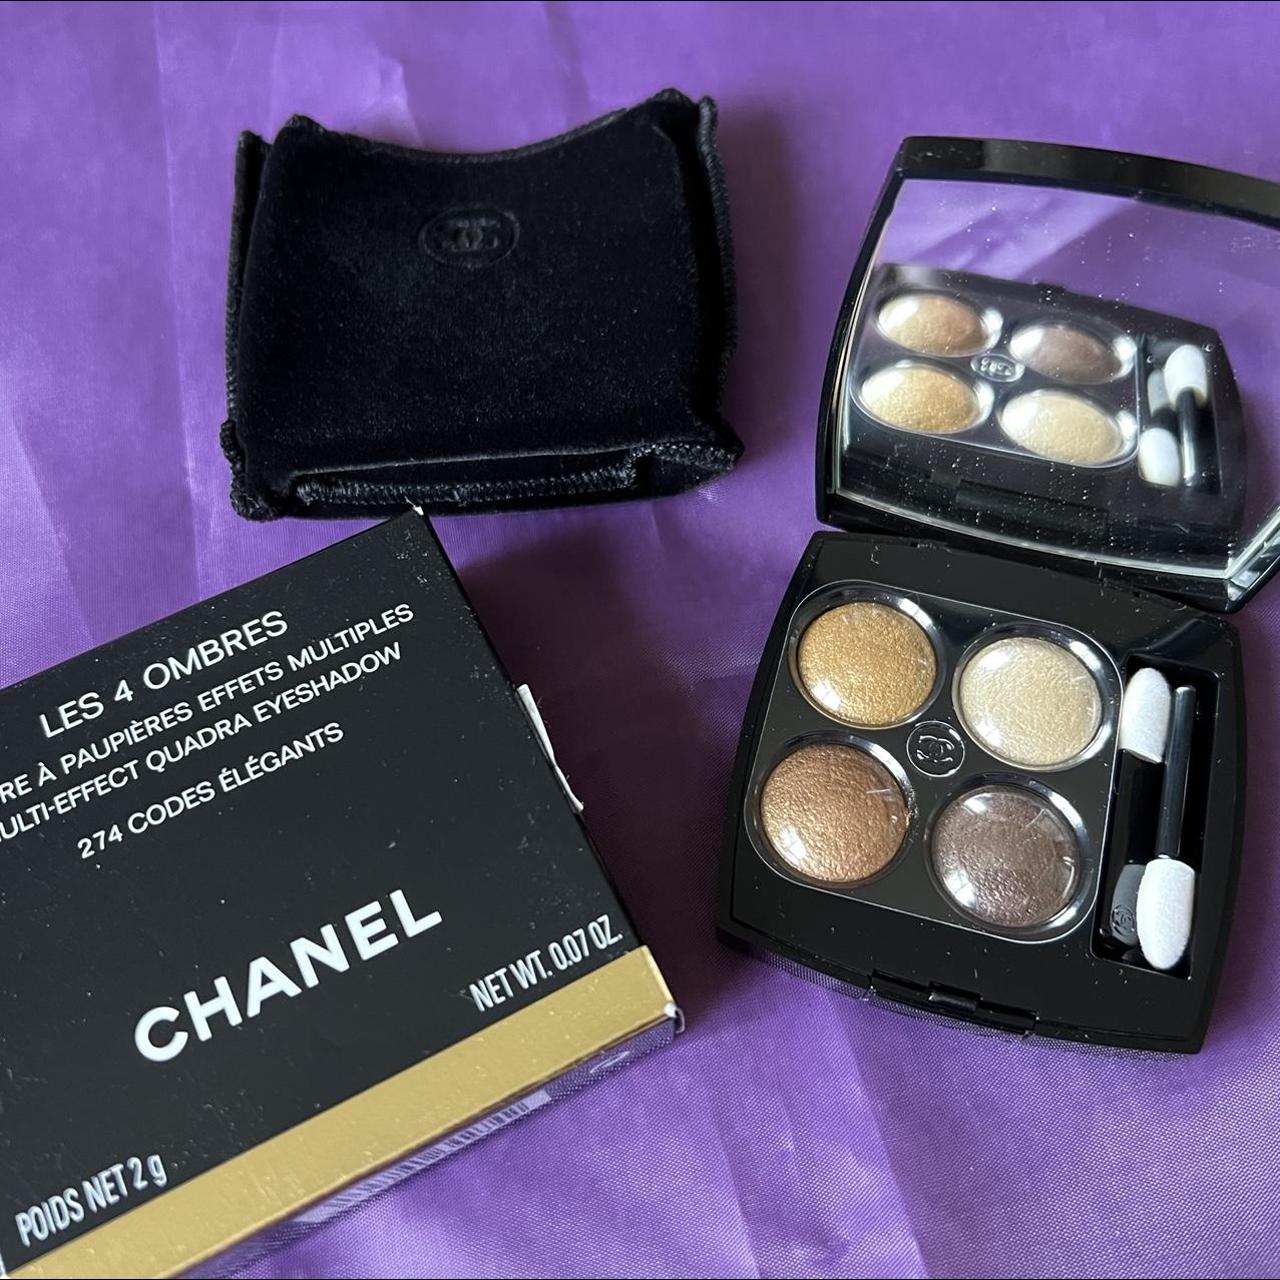 Chanel Les Ombres Multi-Effect Eyeshadow Quad in 274 Codes